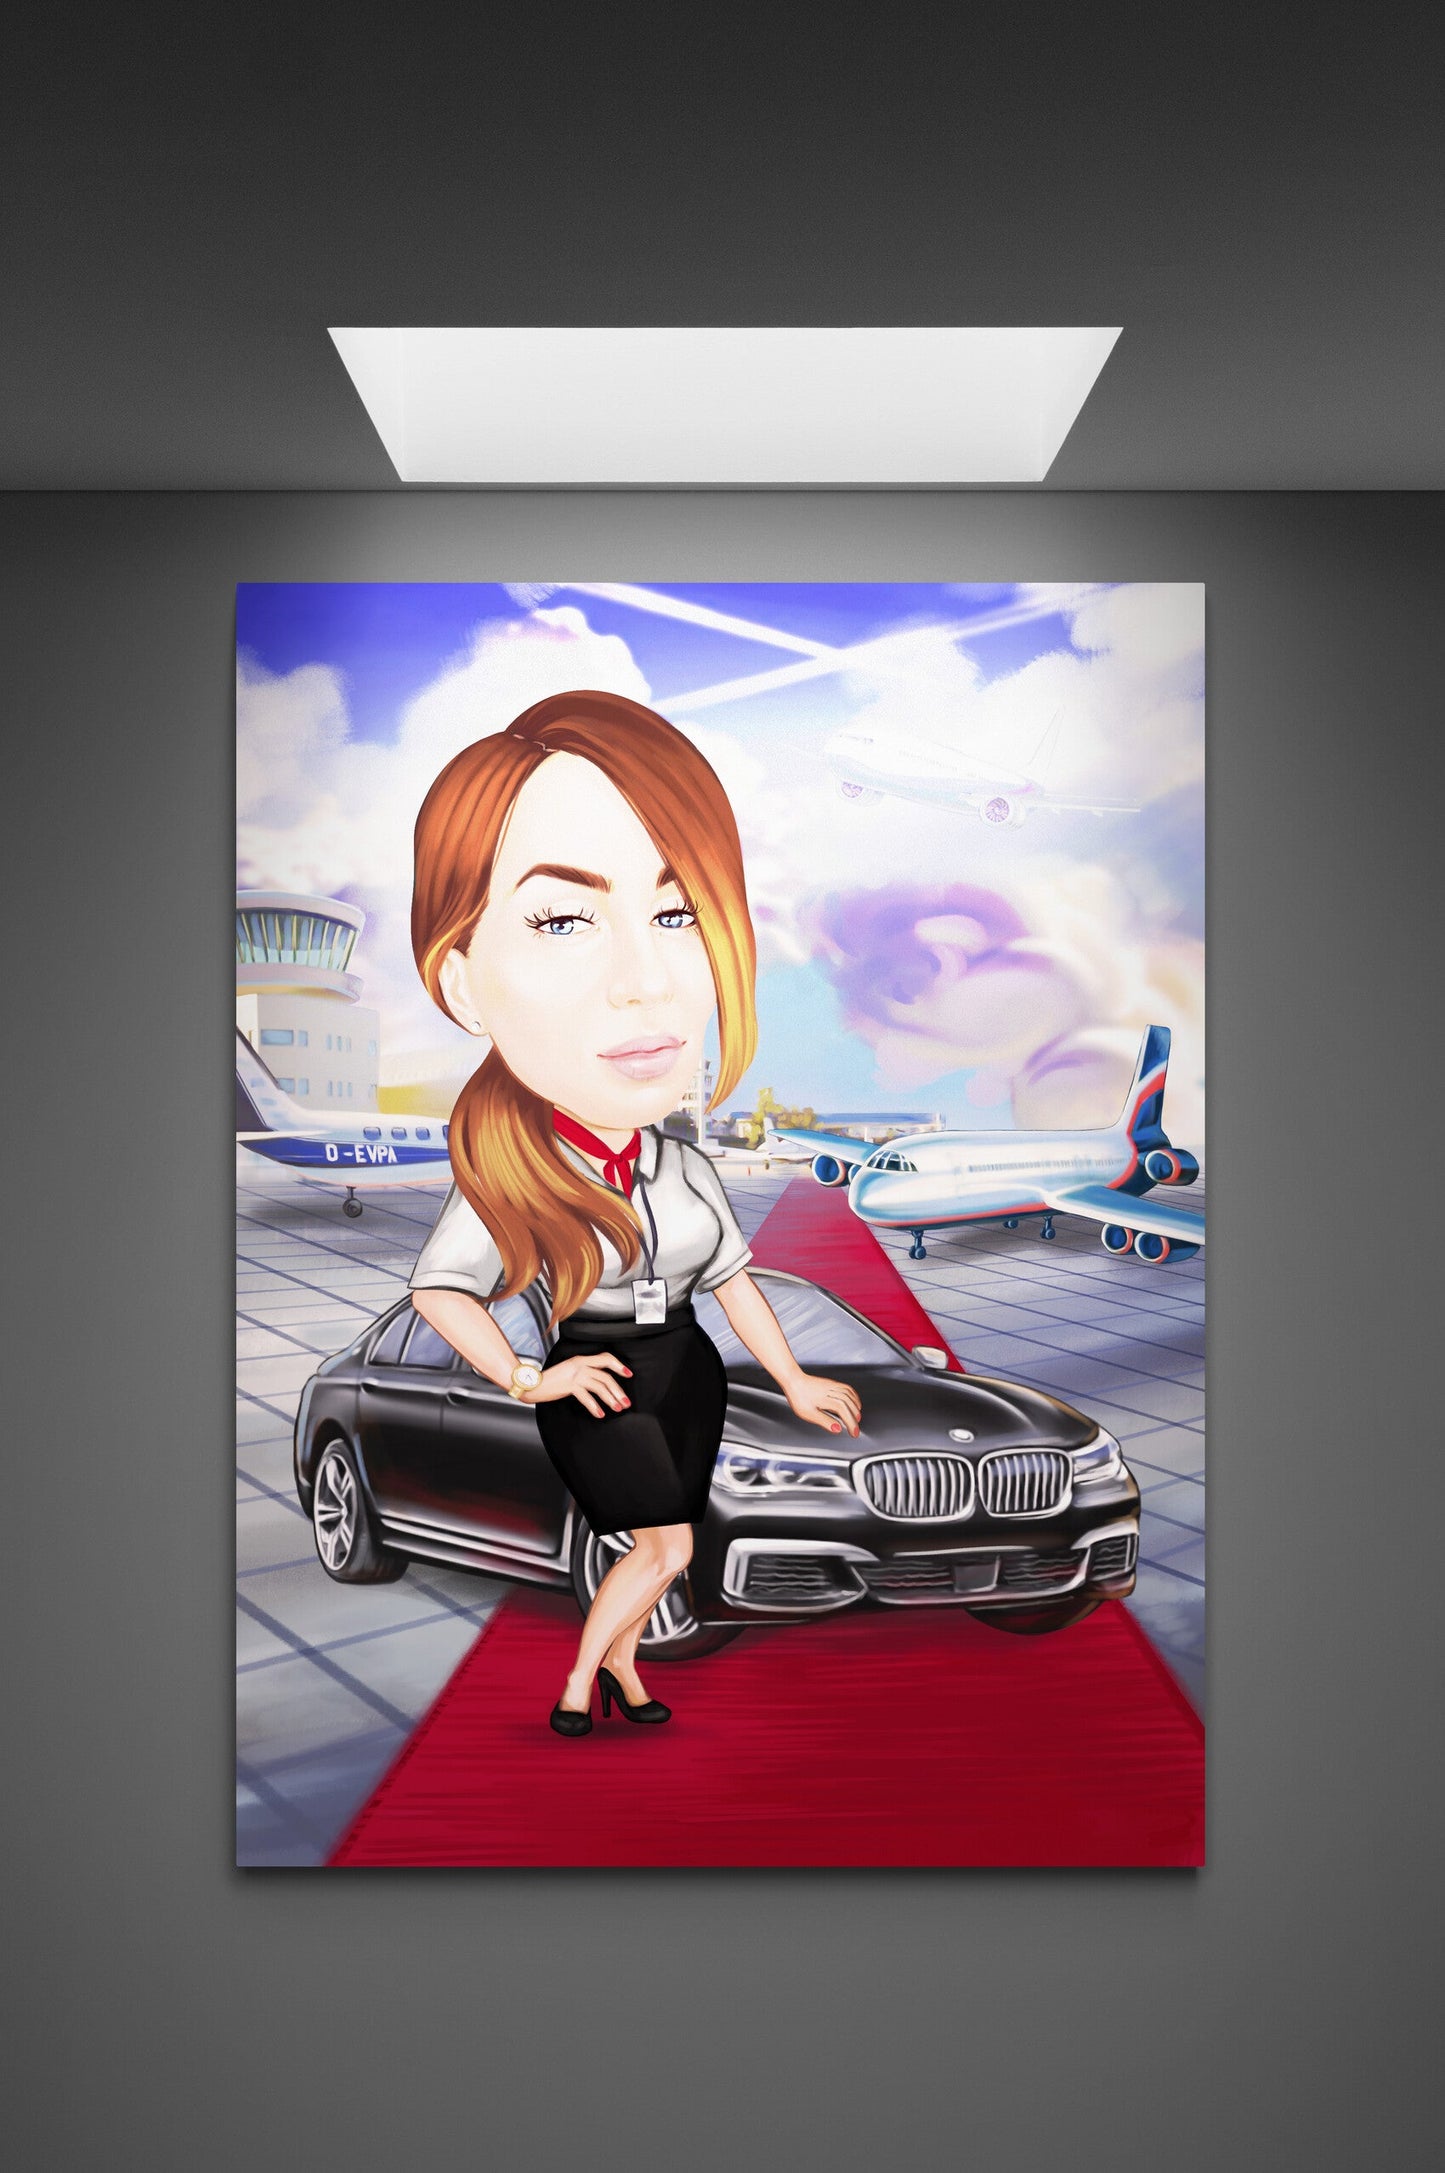 At the airport with the car caricature